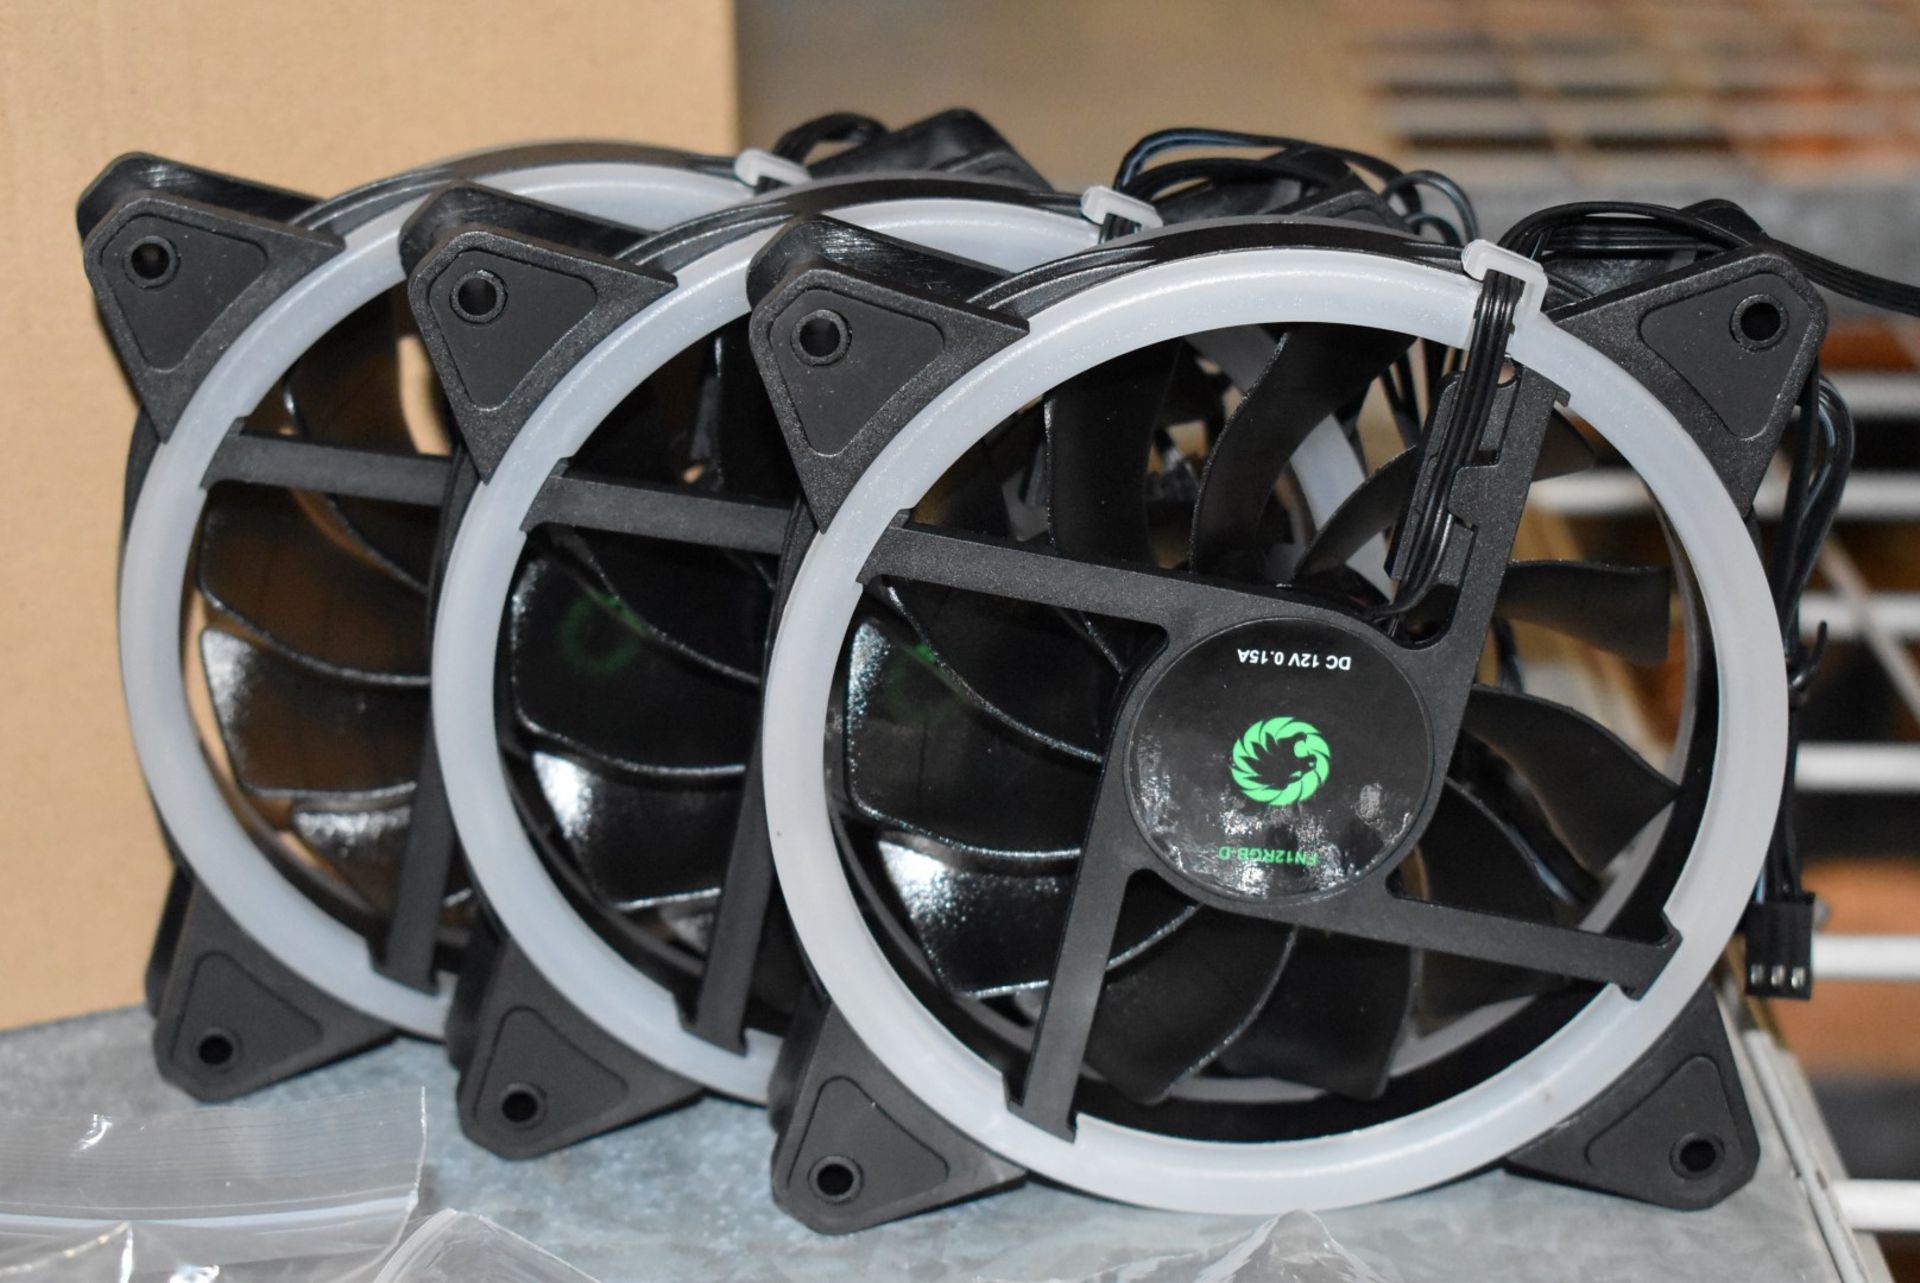 3 x GameMax LED Fan Packs For PC Gaming Cases - Each Pack Includes 3 x 120mm LED Case Fans - Image 2 of 8